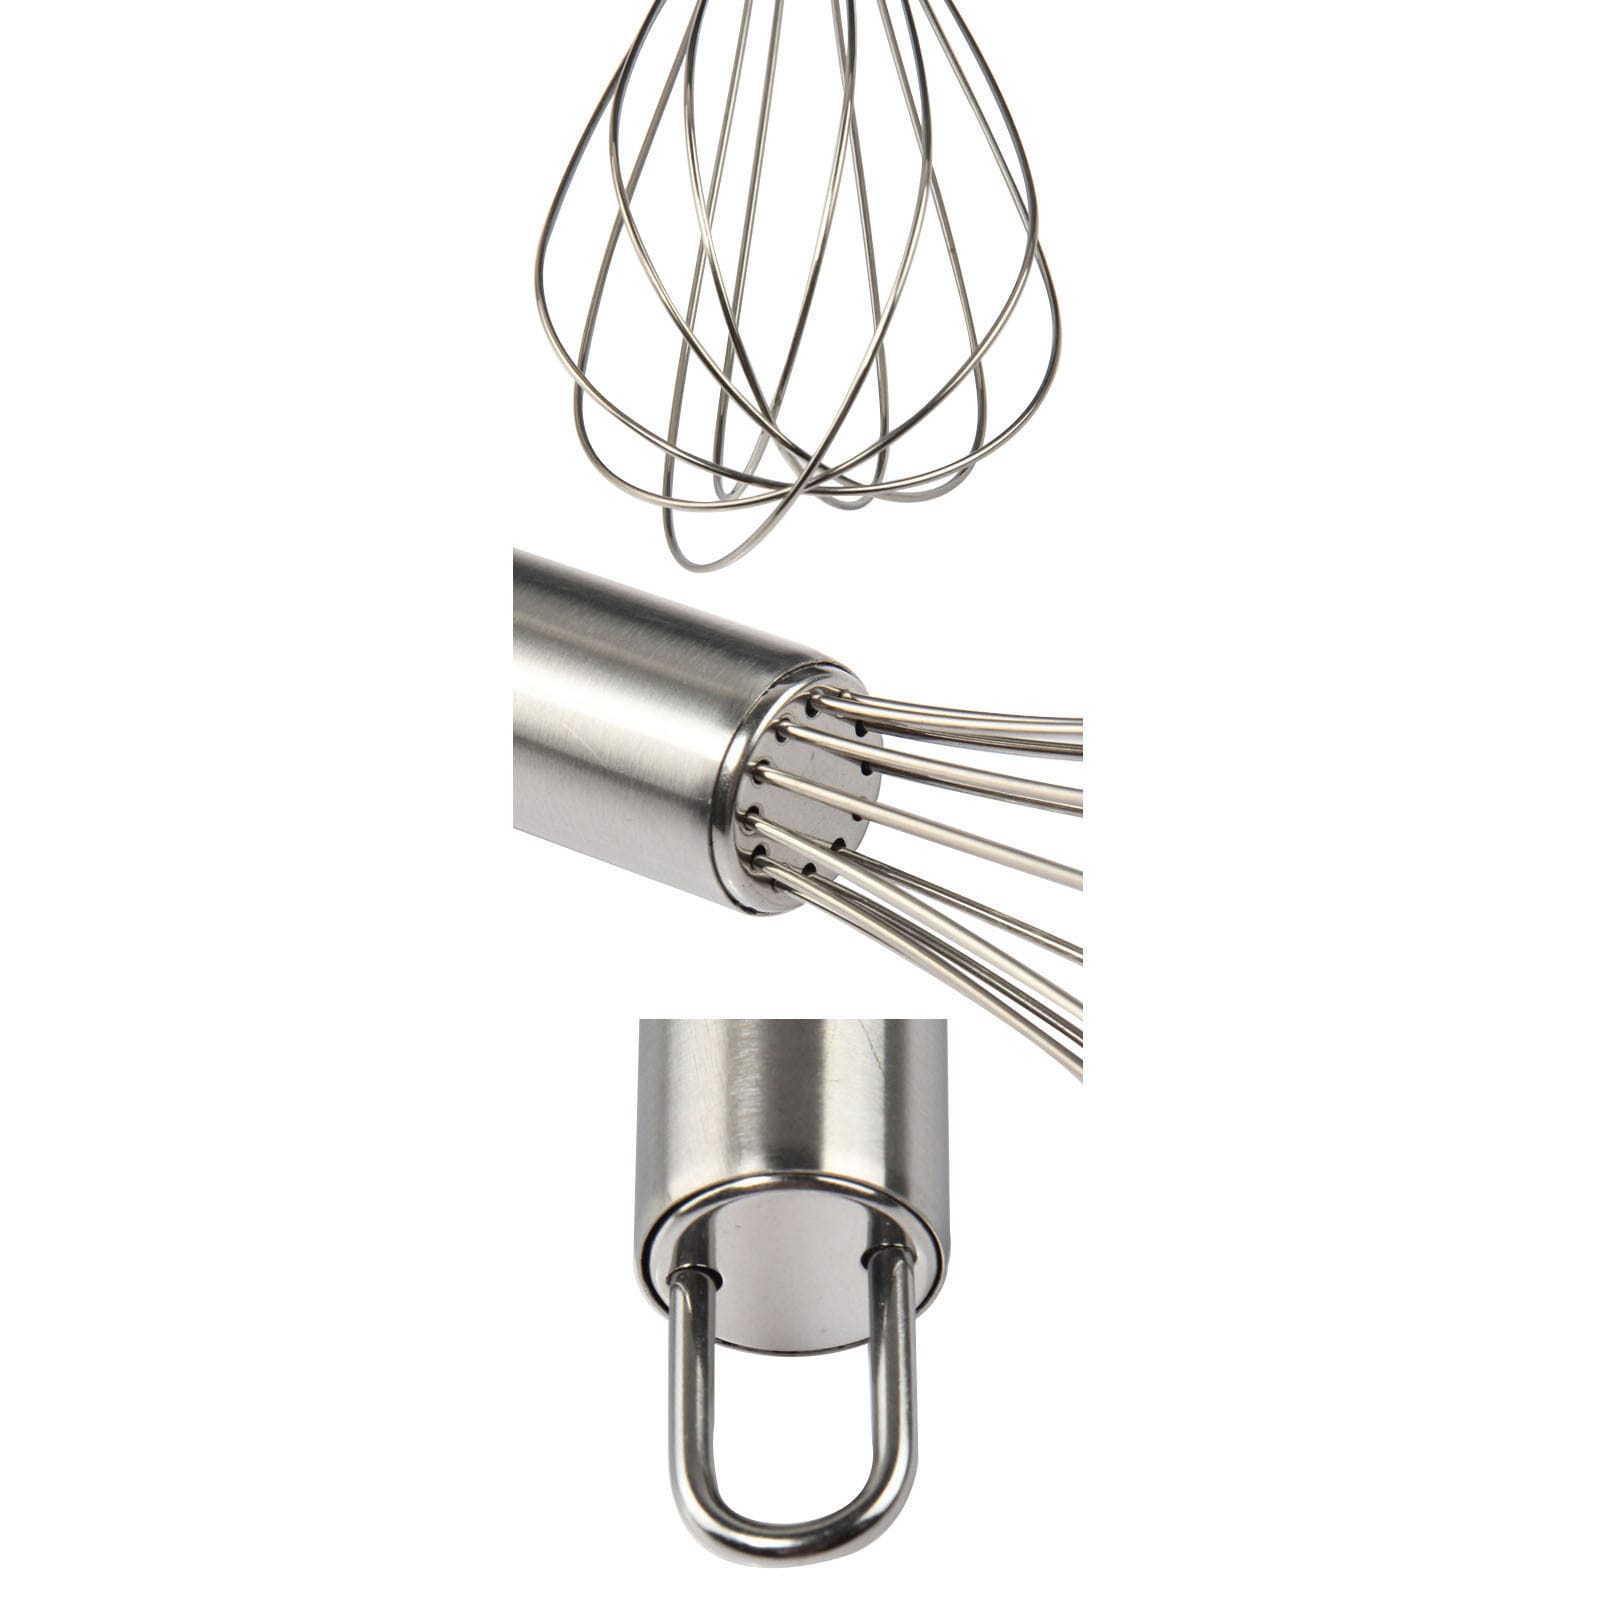 https://ak1.ostkcdn.com/images/products/9826214/Stainless-Steel-3-piece-Balloon-Wire-Whisk-Set-6edf1f71-58af-496f-b9c0-123ba824c2d0.jpg